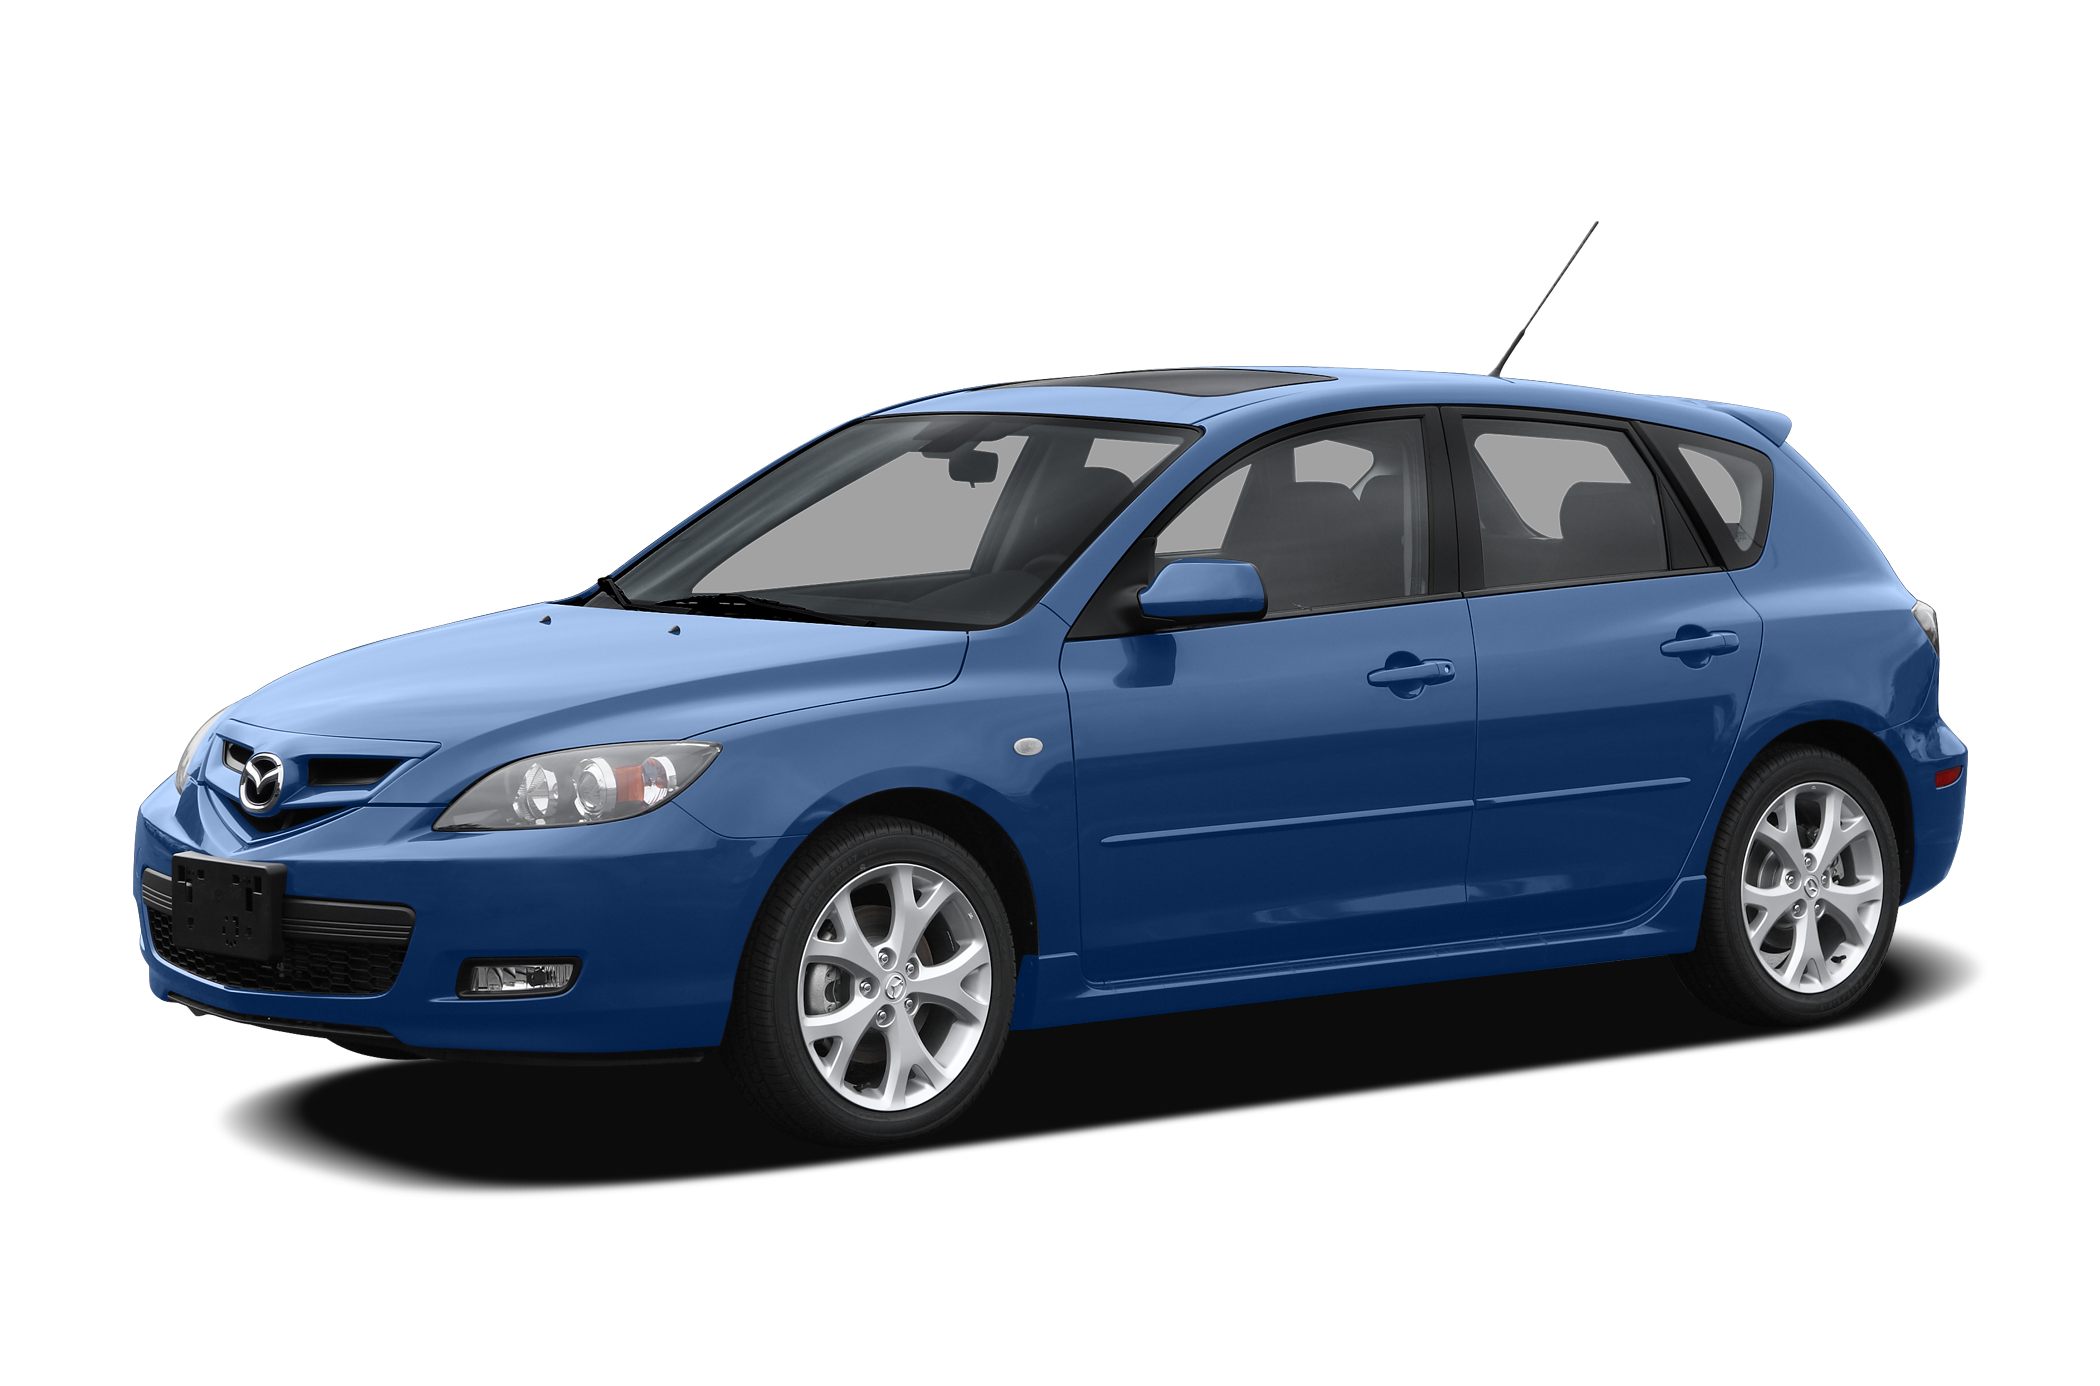 07 Mazda Mazda3 S Grand Touring 4dr Hatchback Specs And Prices